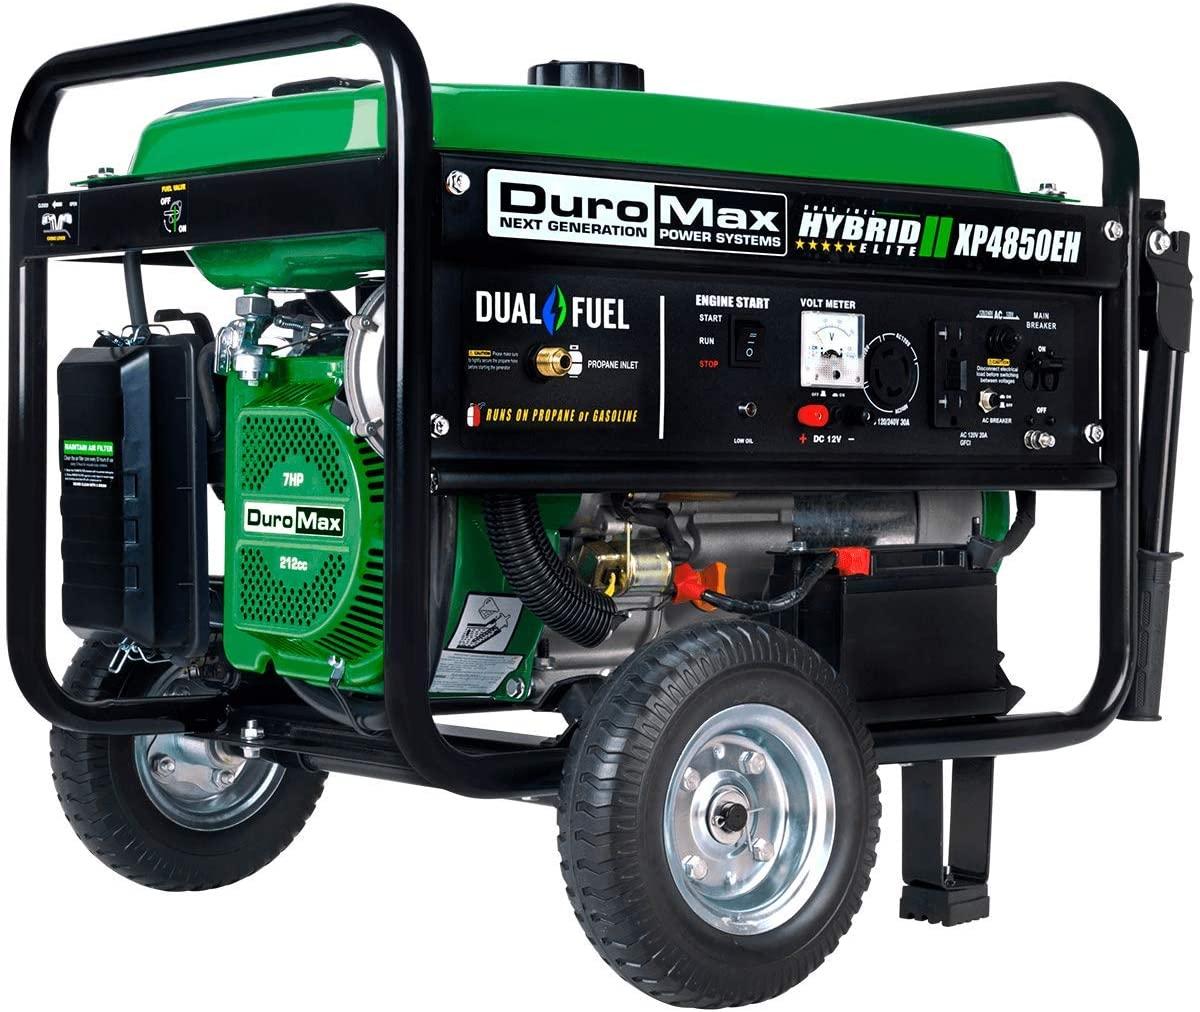 DuroMax XP4850EH Dual Fuel Portable Generator for $383.99 Shipped